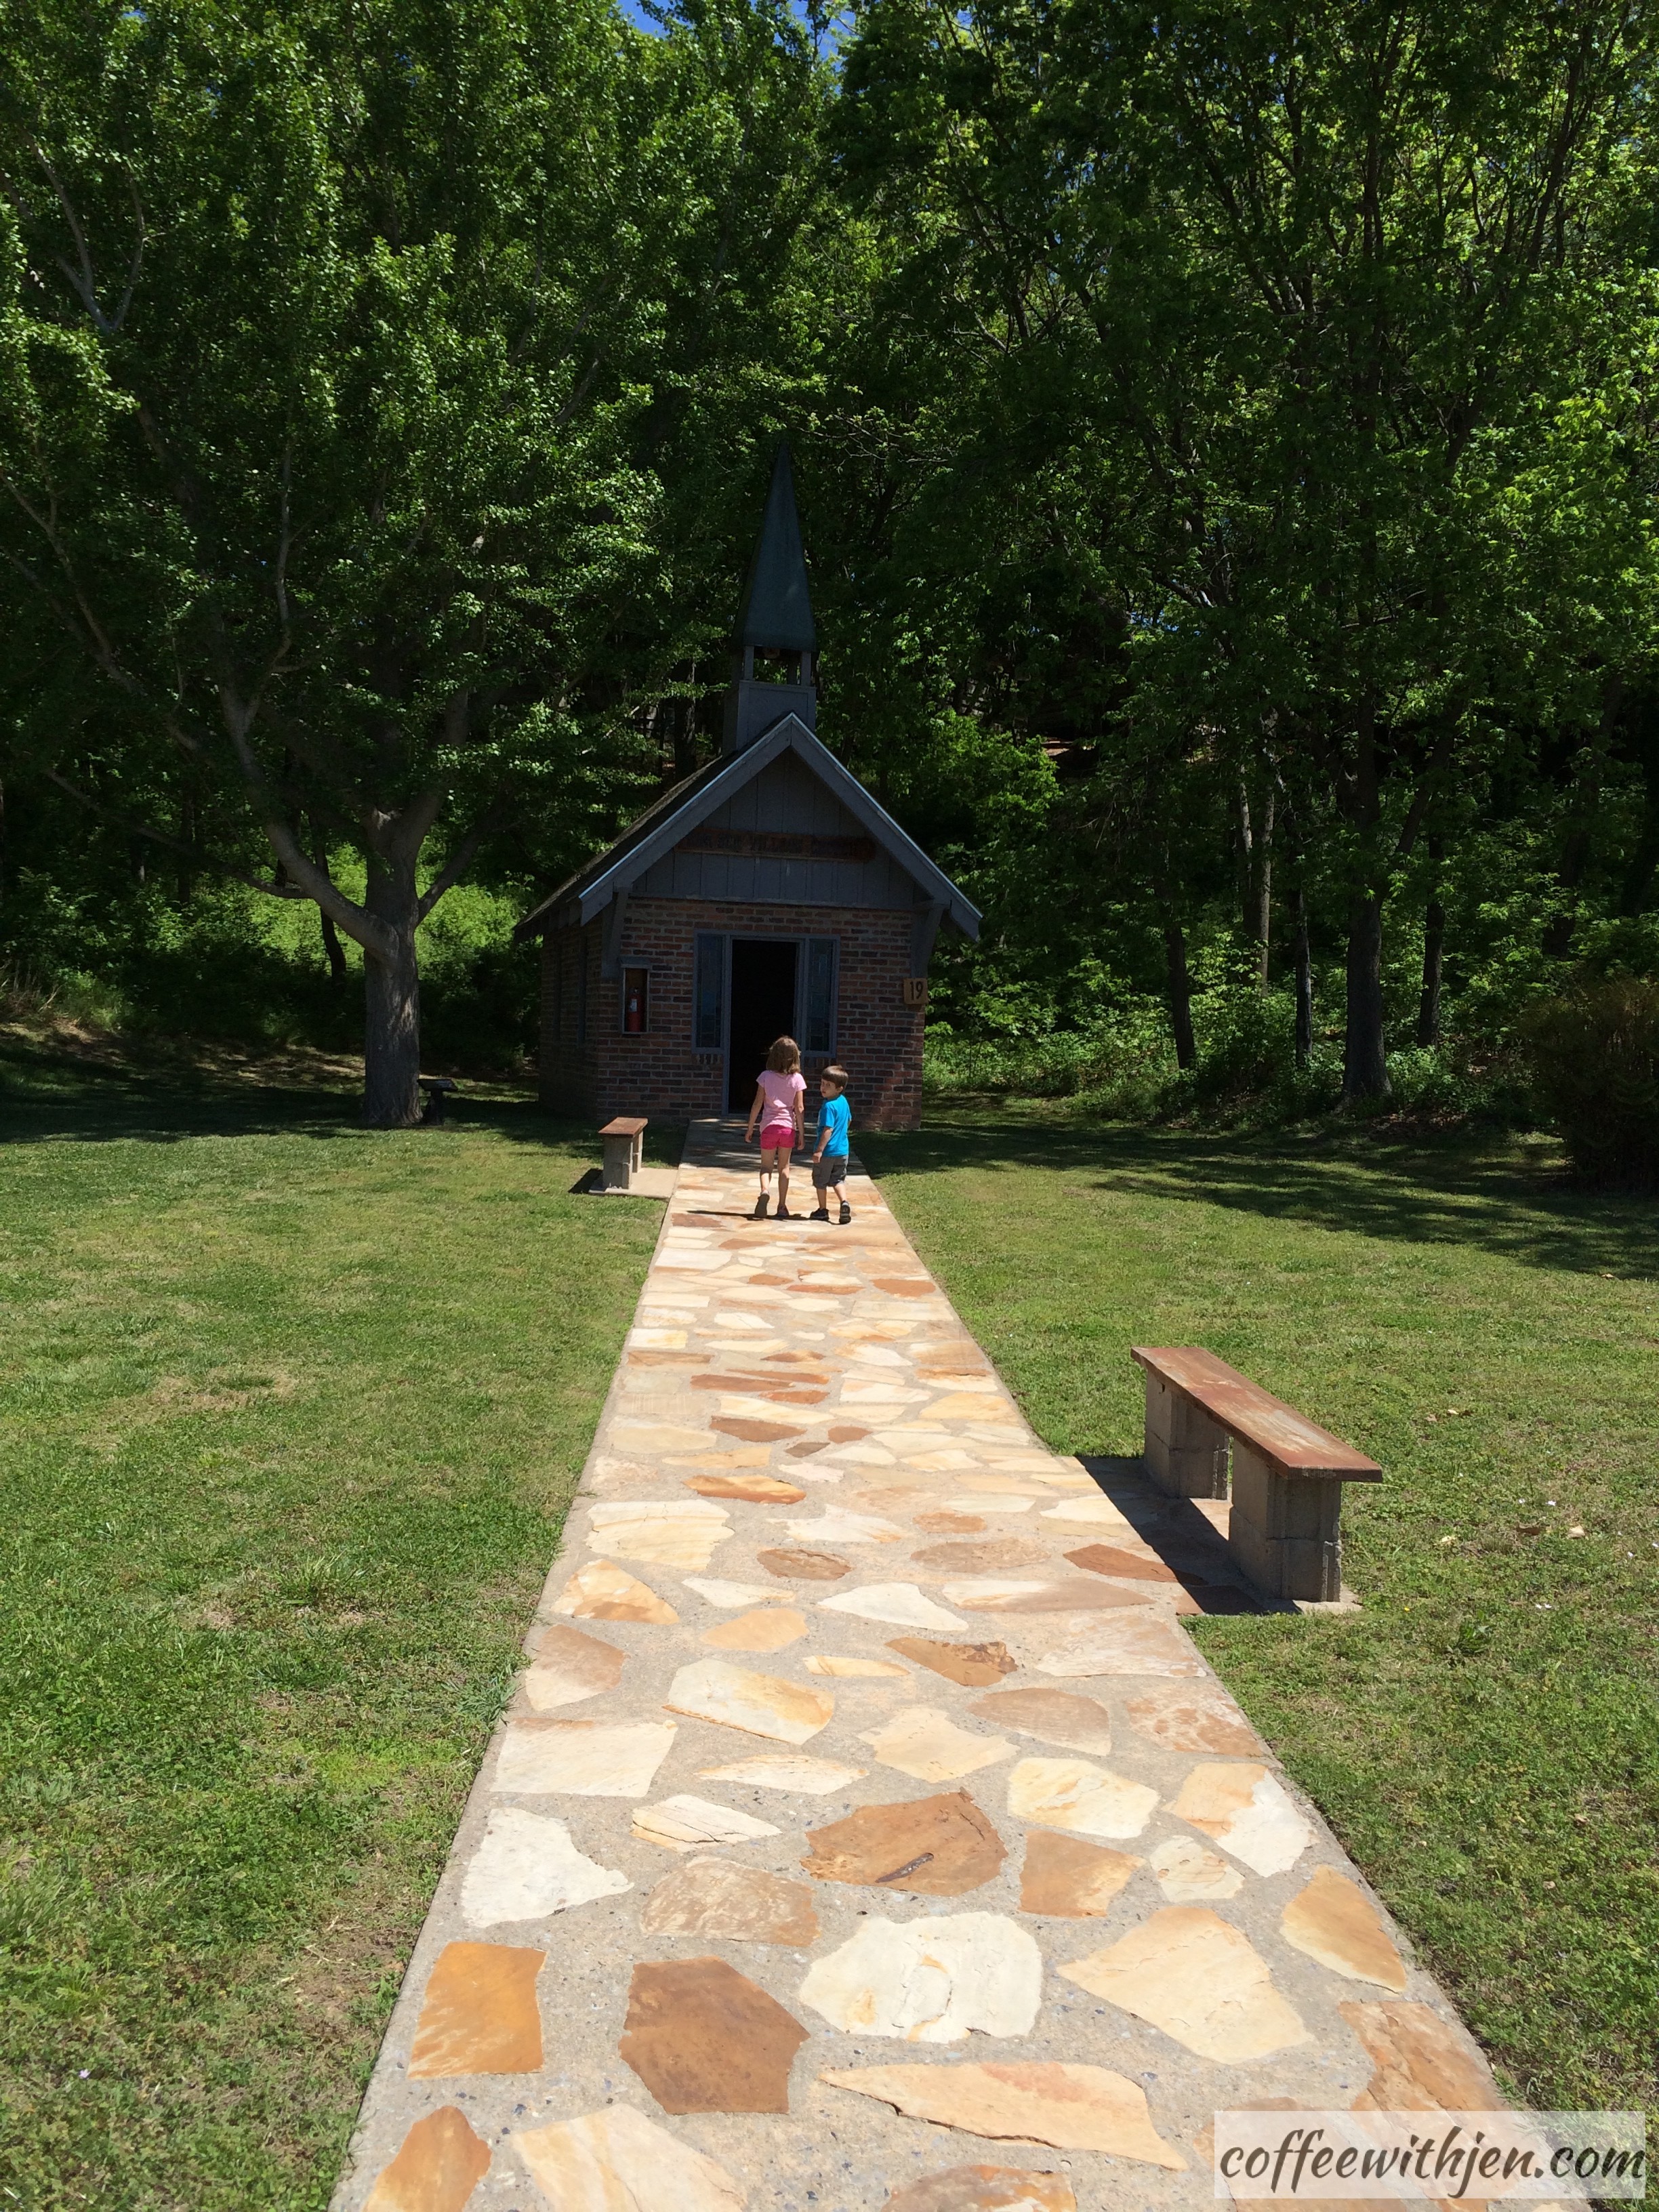 This little chapel was the first building on the property.  Mrs. Jones thought it would be nice to have a church here.  